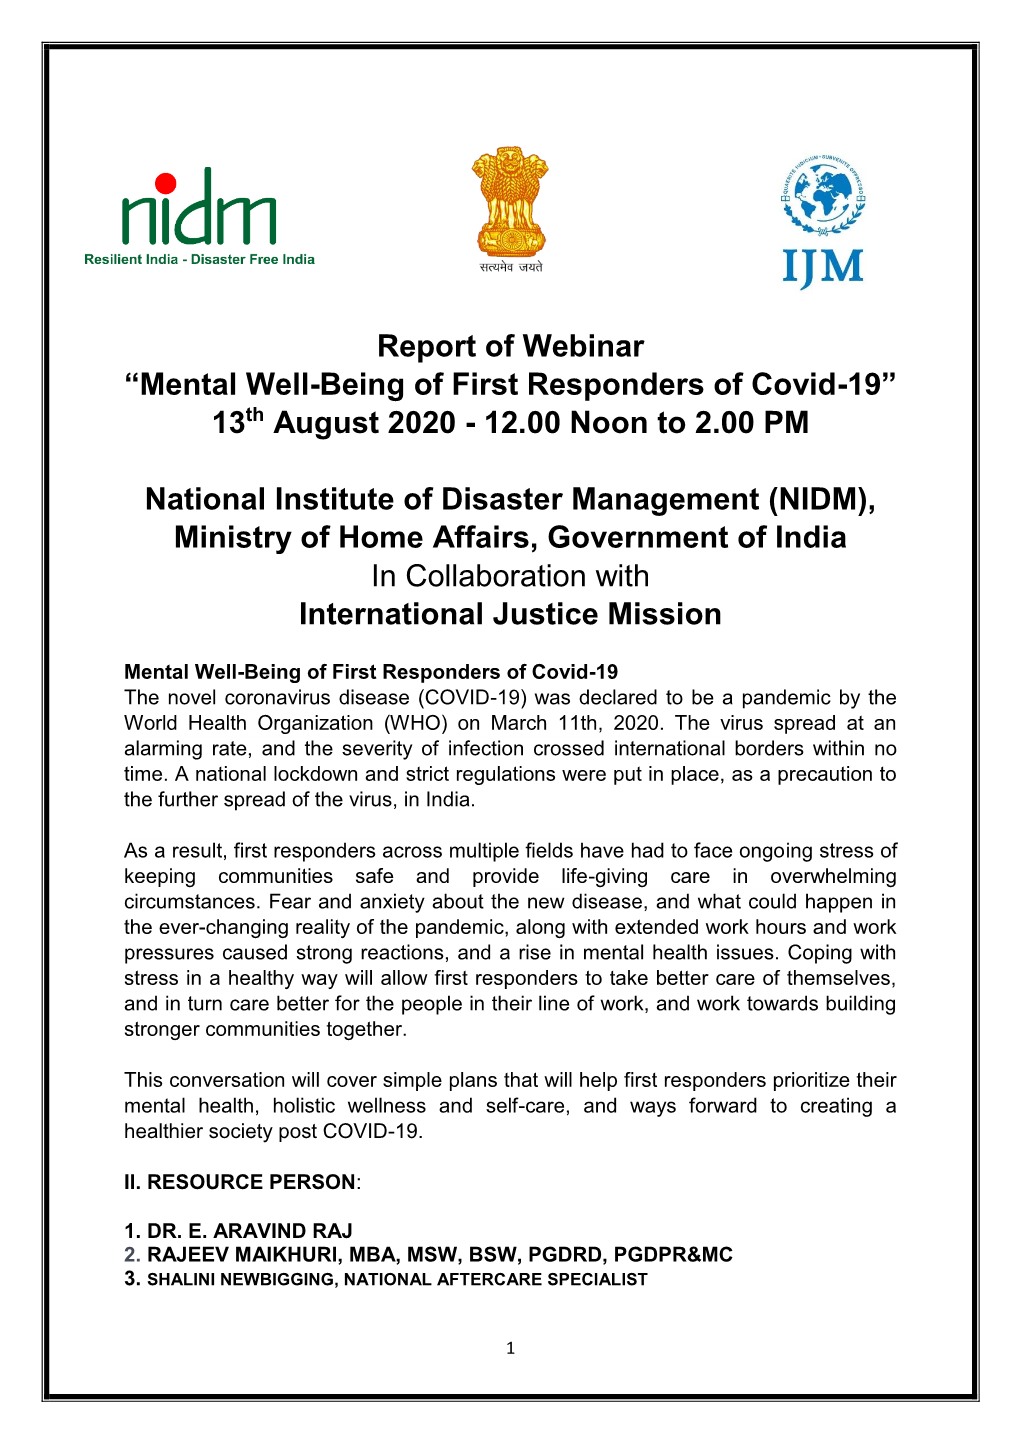 Report of Webinar “Mental Well-Being of First Responders of Covid-19” 13Th August 2020 - 12.00 Noon to 2.00 PM